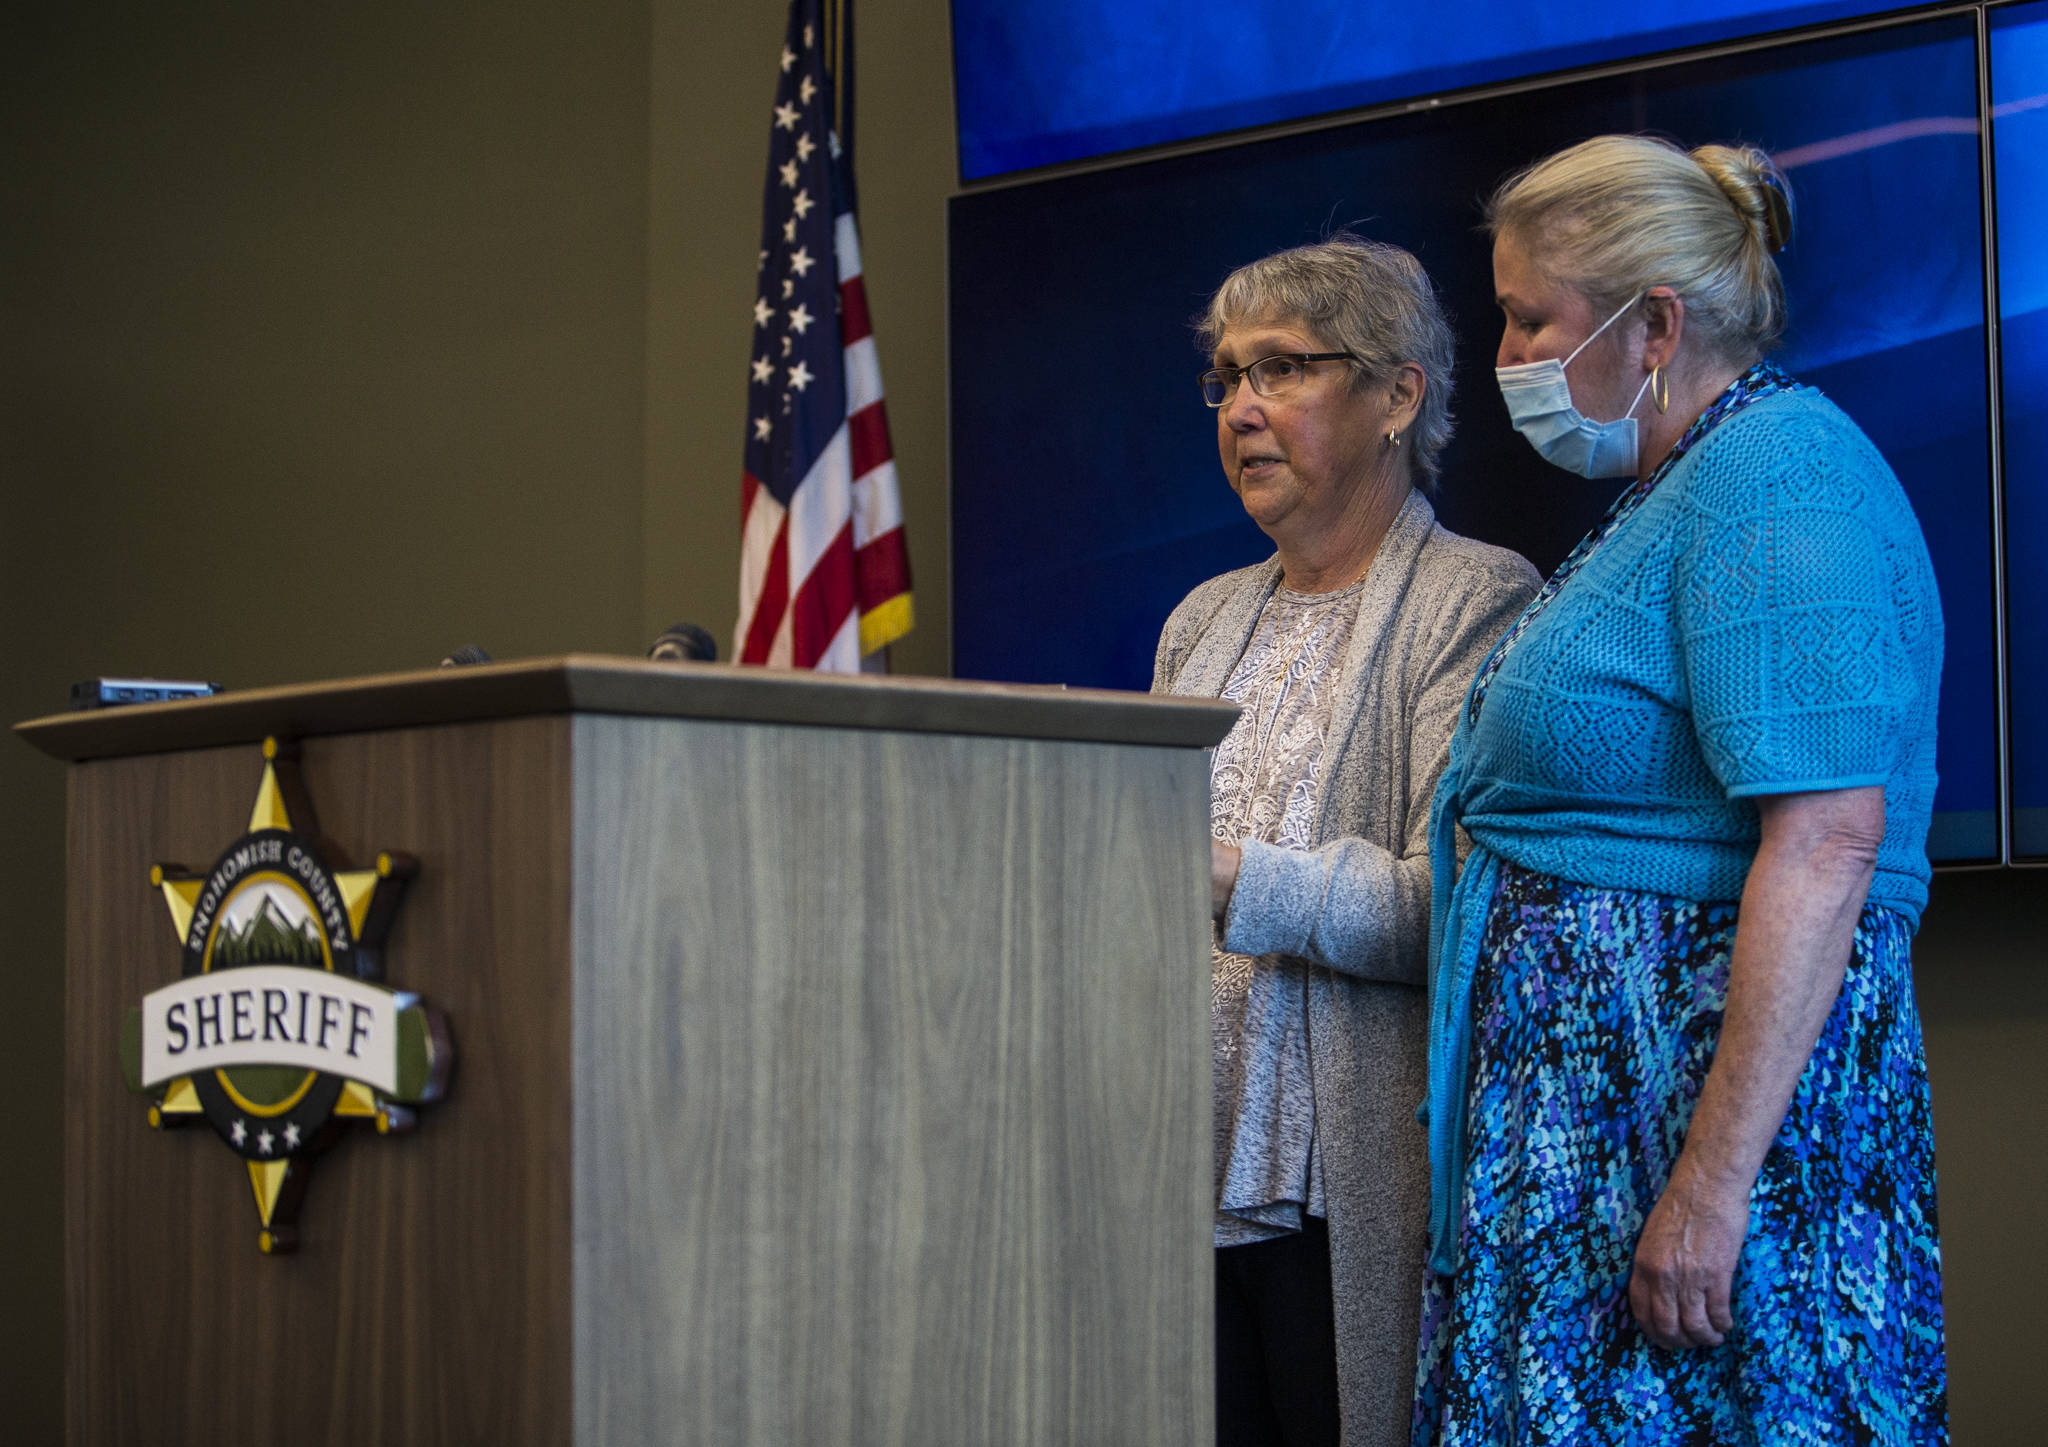 Rodney Peter Johnson’s sister, Marianne Lambert (left), speaks at a news conference in Everett on Wednesday with Johnson’s cousin, Eleanore “Ellie” Perry, whose DNA helped identify Johnson. (Olivia Vanni / The Herald)